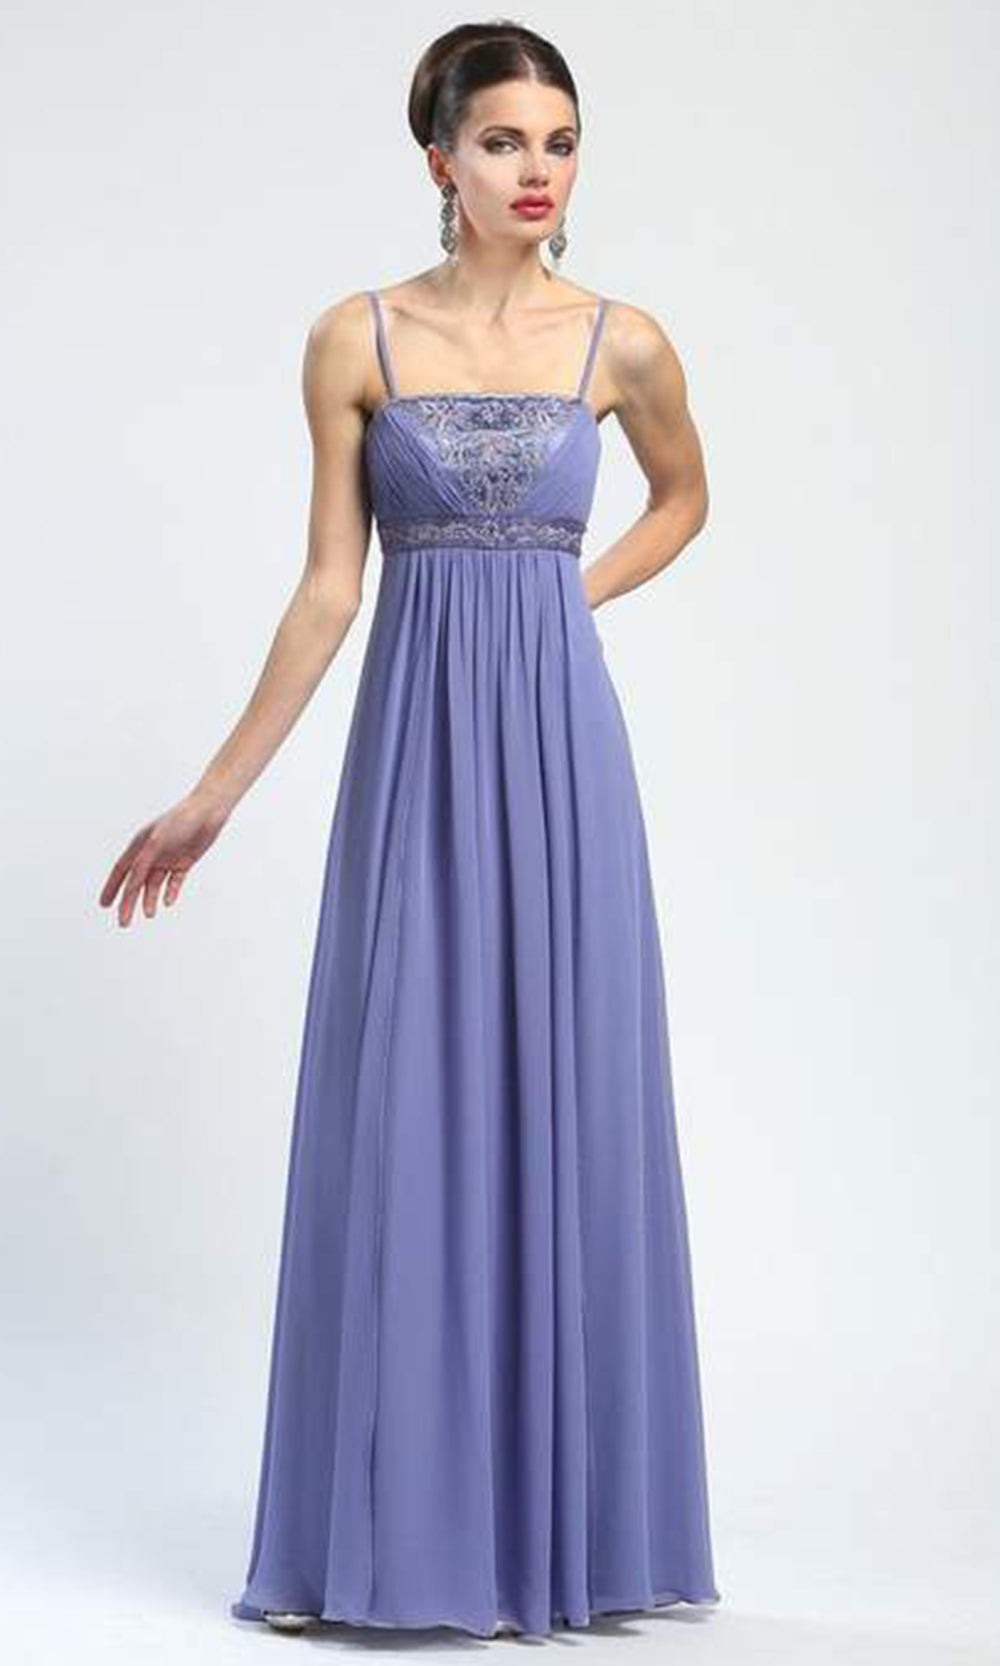 Sue Wong - N4219 Beaded A-line Dress - 1 pc Periwinkle In Size 2 Available CCSALE 2 / Periwinkle